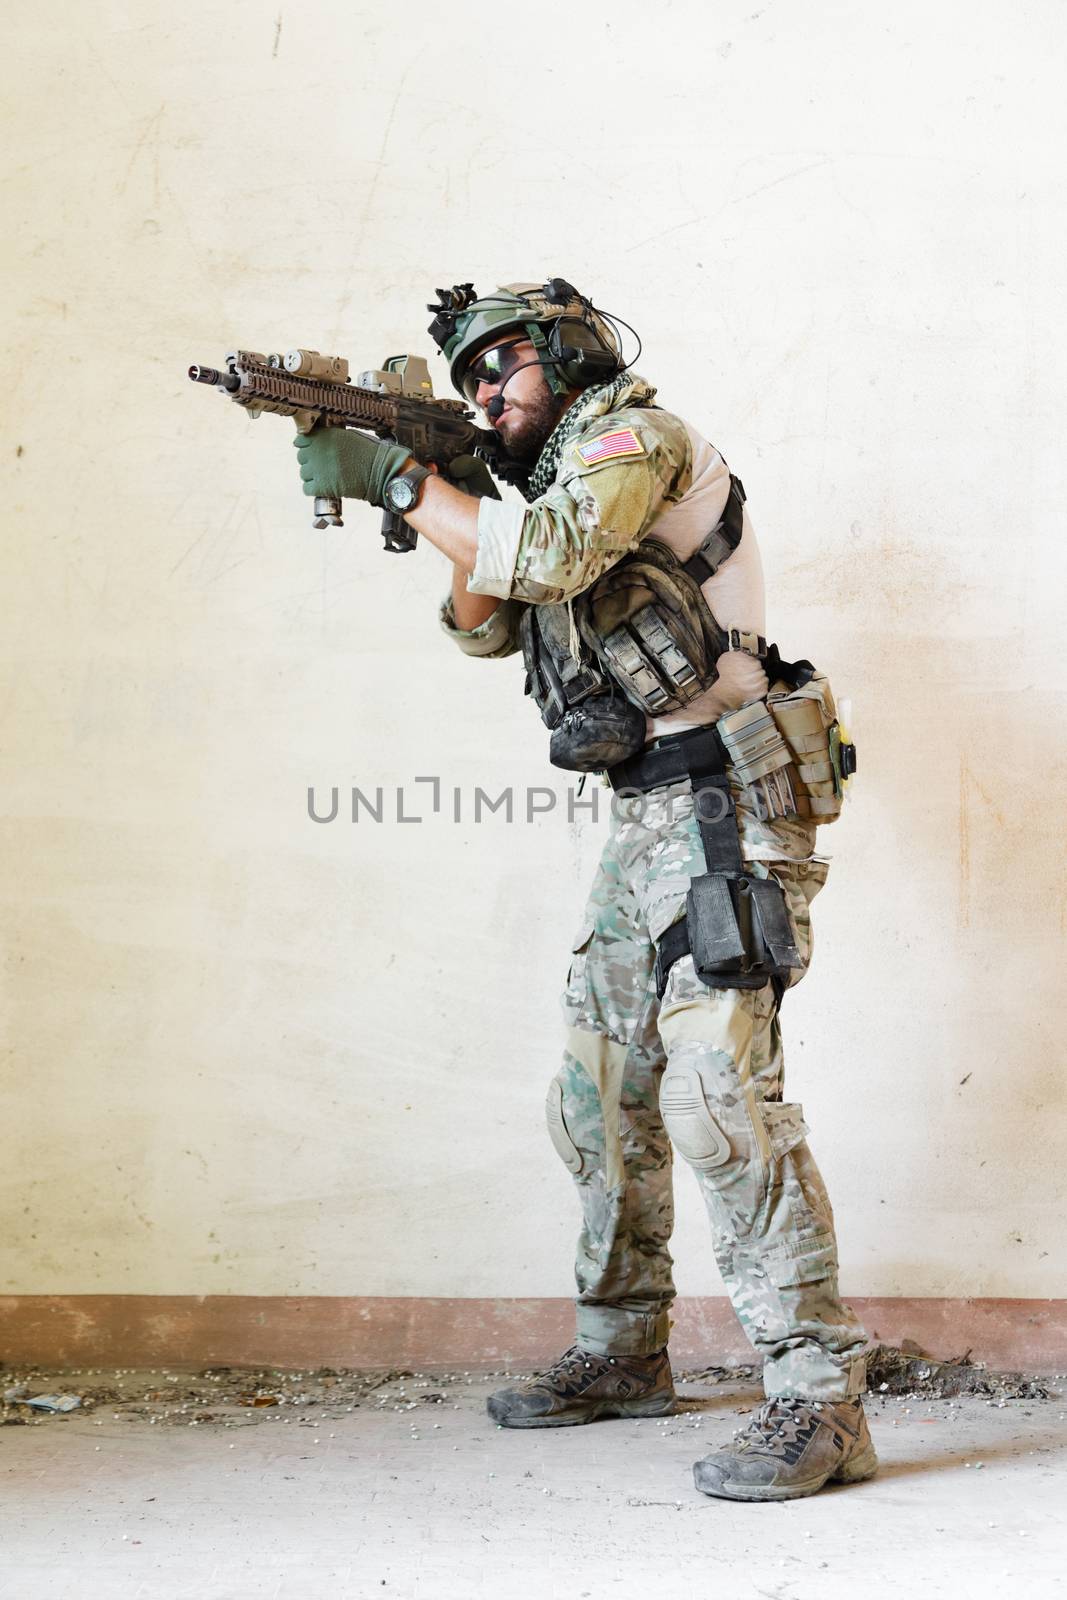 american soldier pointing his rifle during the military operation
